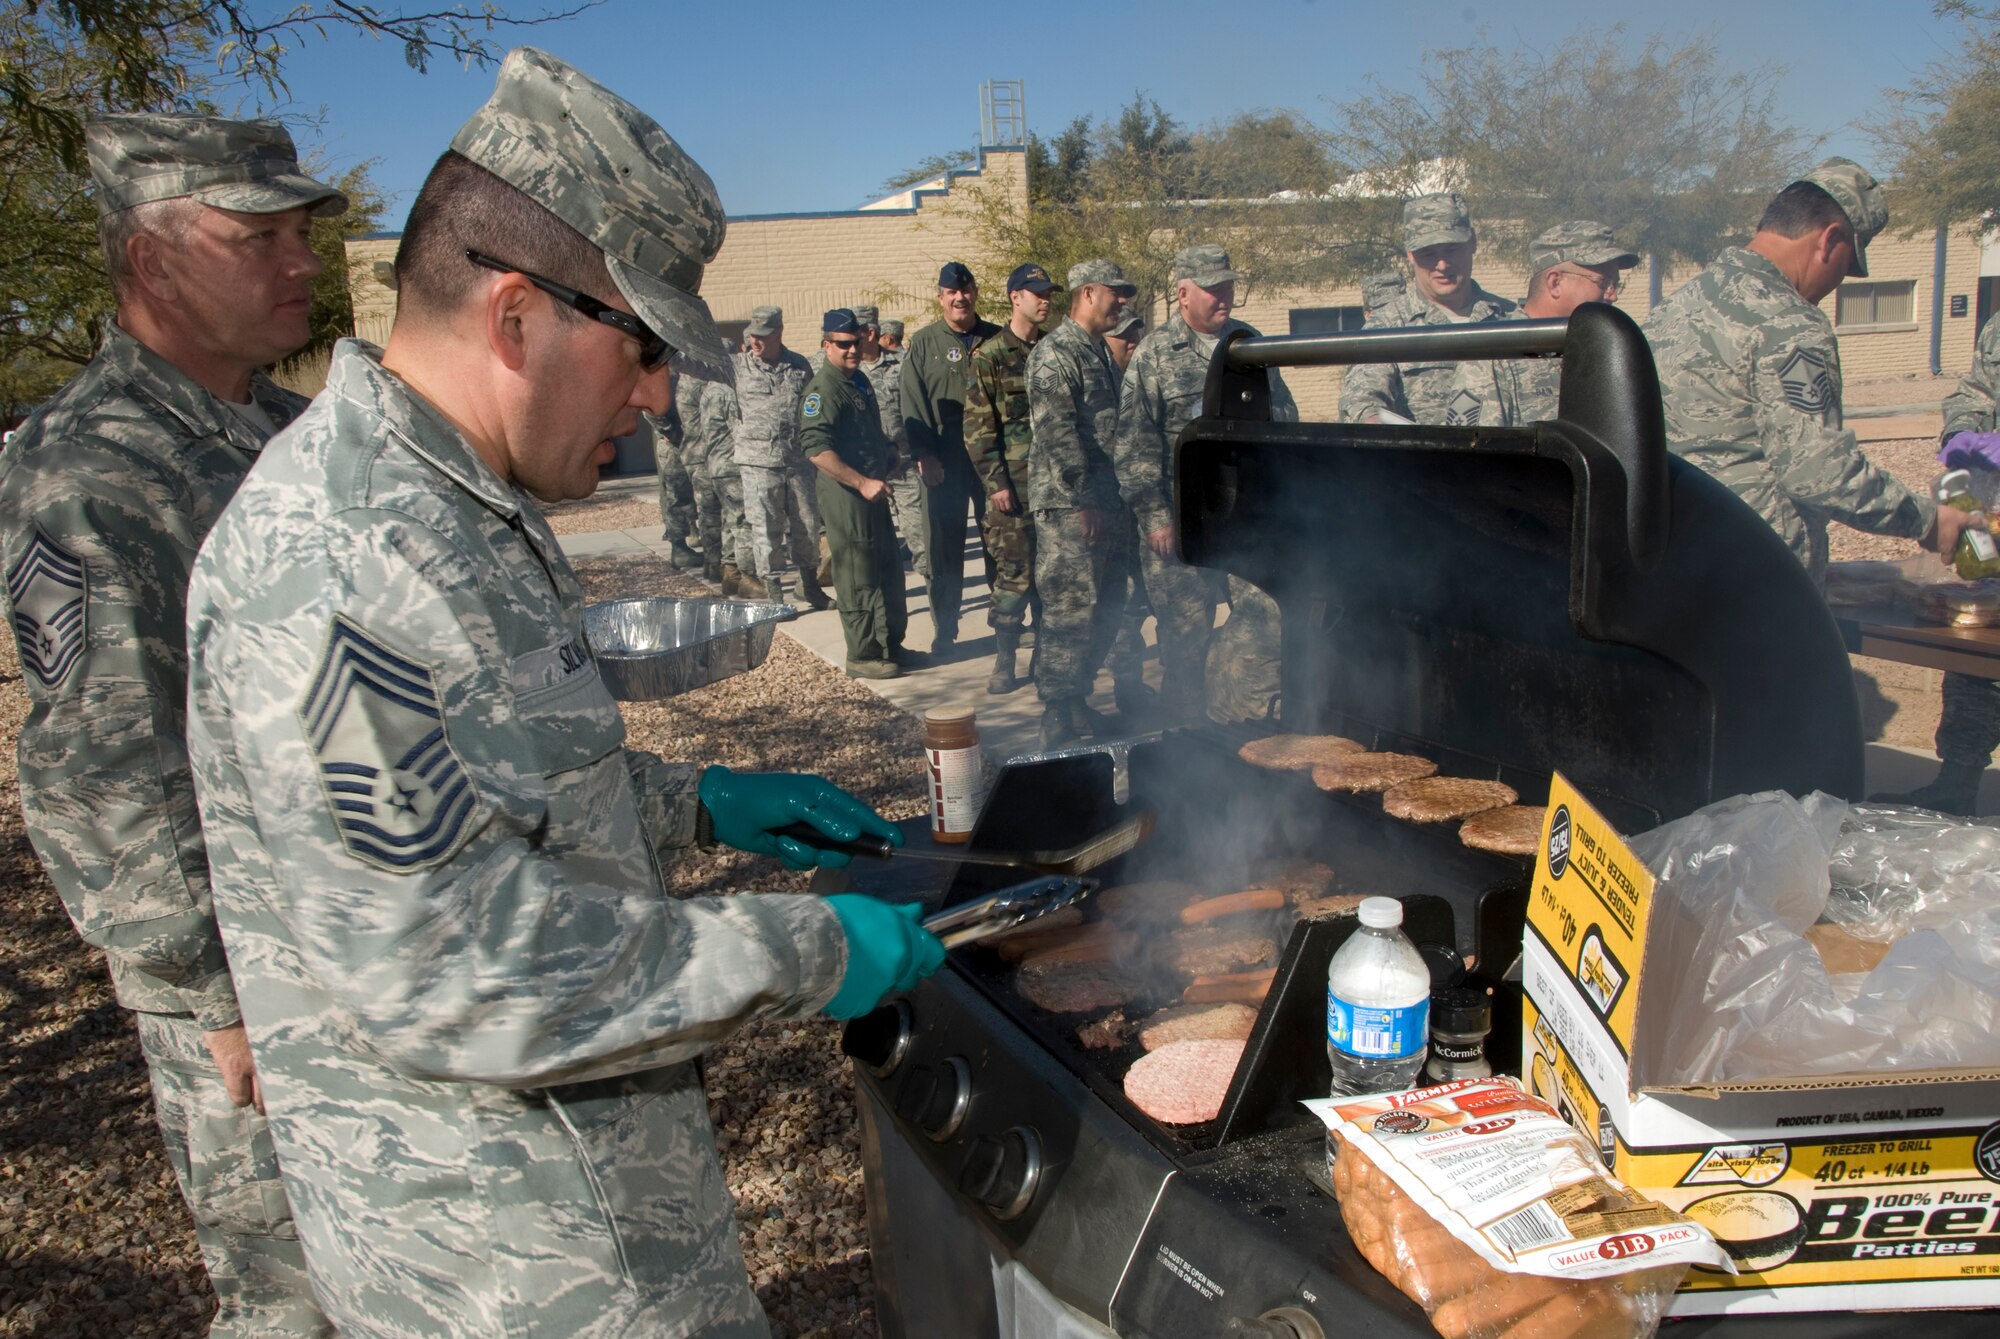 Chief Master Sgt. George Silvas grills hotdogs and hamburgers for fellow 162nd Fighter Wing members Jan. 28. The Chiefs Council here is raising funds to help junior enlisted members while taking the opportunity meet with young troops on base. (U.S. Air Force photo/Master Sgt. Dave Neve)